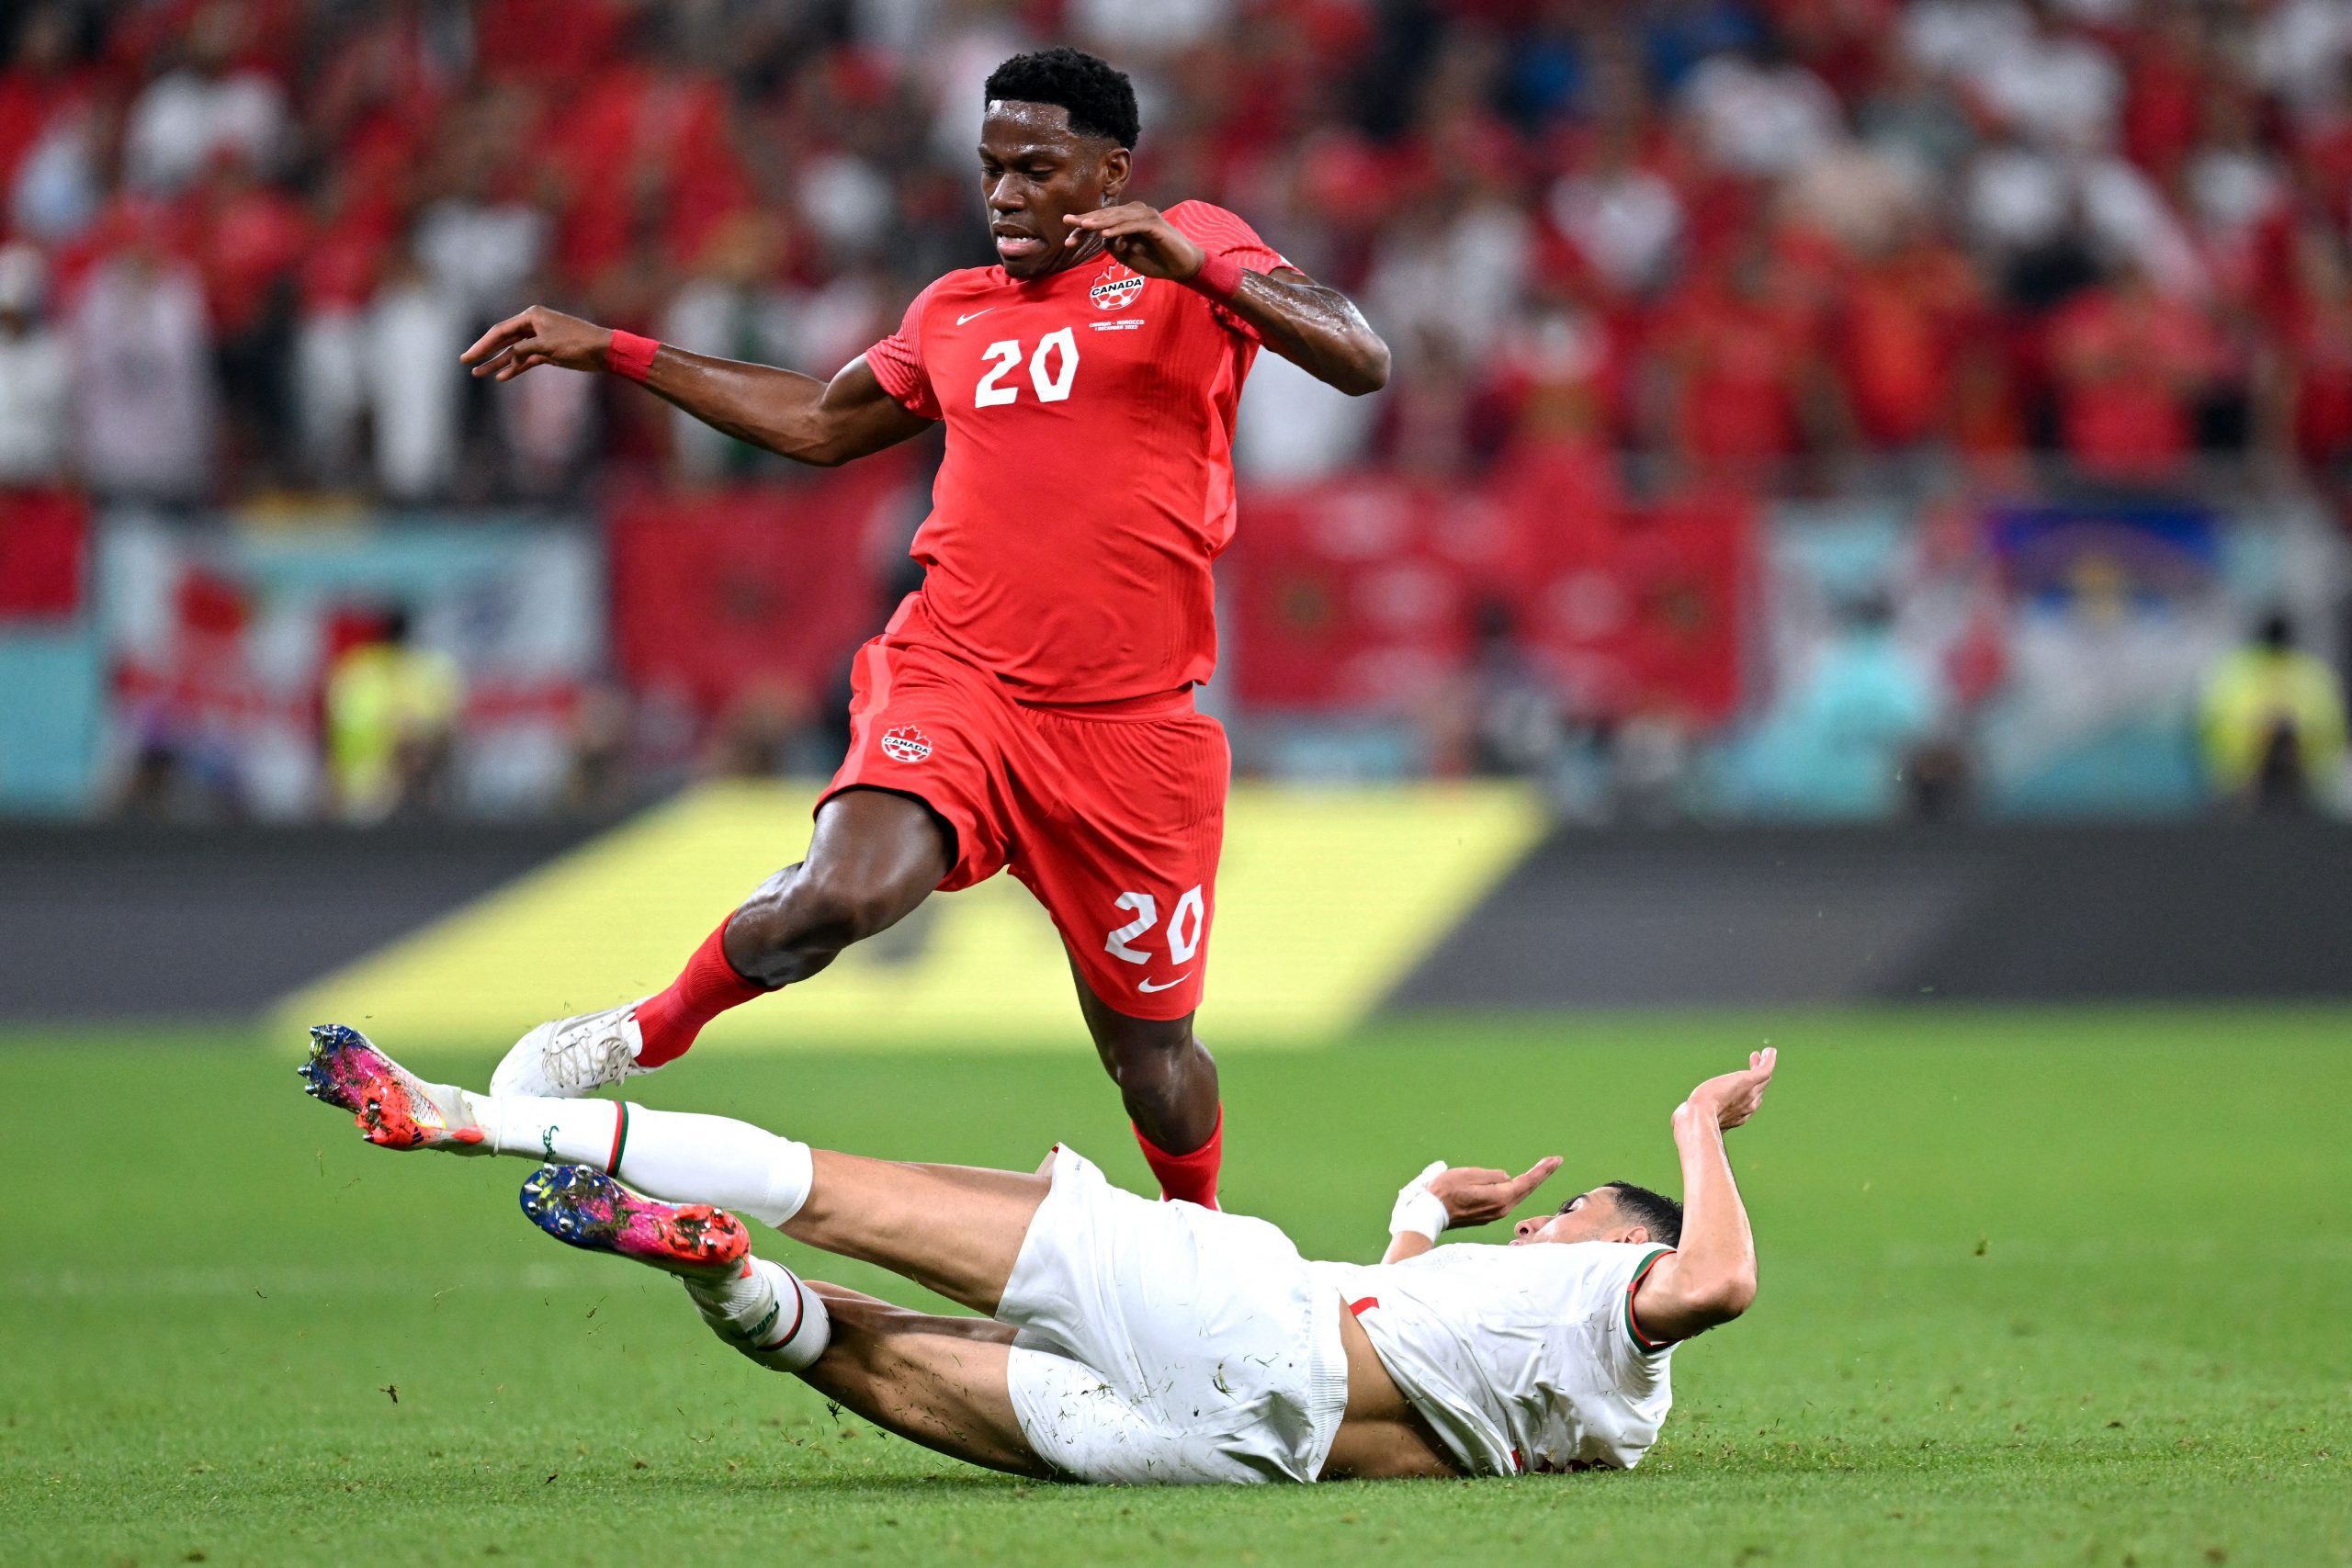 Canada's forward #20 Jonathan David (top) jumps over a Morocco player during the Qatar 2022 World Cup Group F football match between Canada and Morocco at the Al-Thumama Stadium in Doha on December 1, 2022